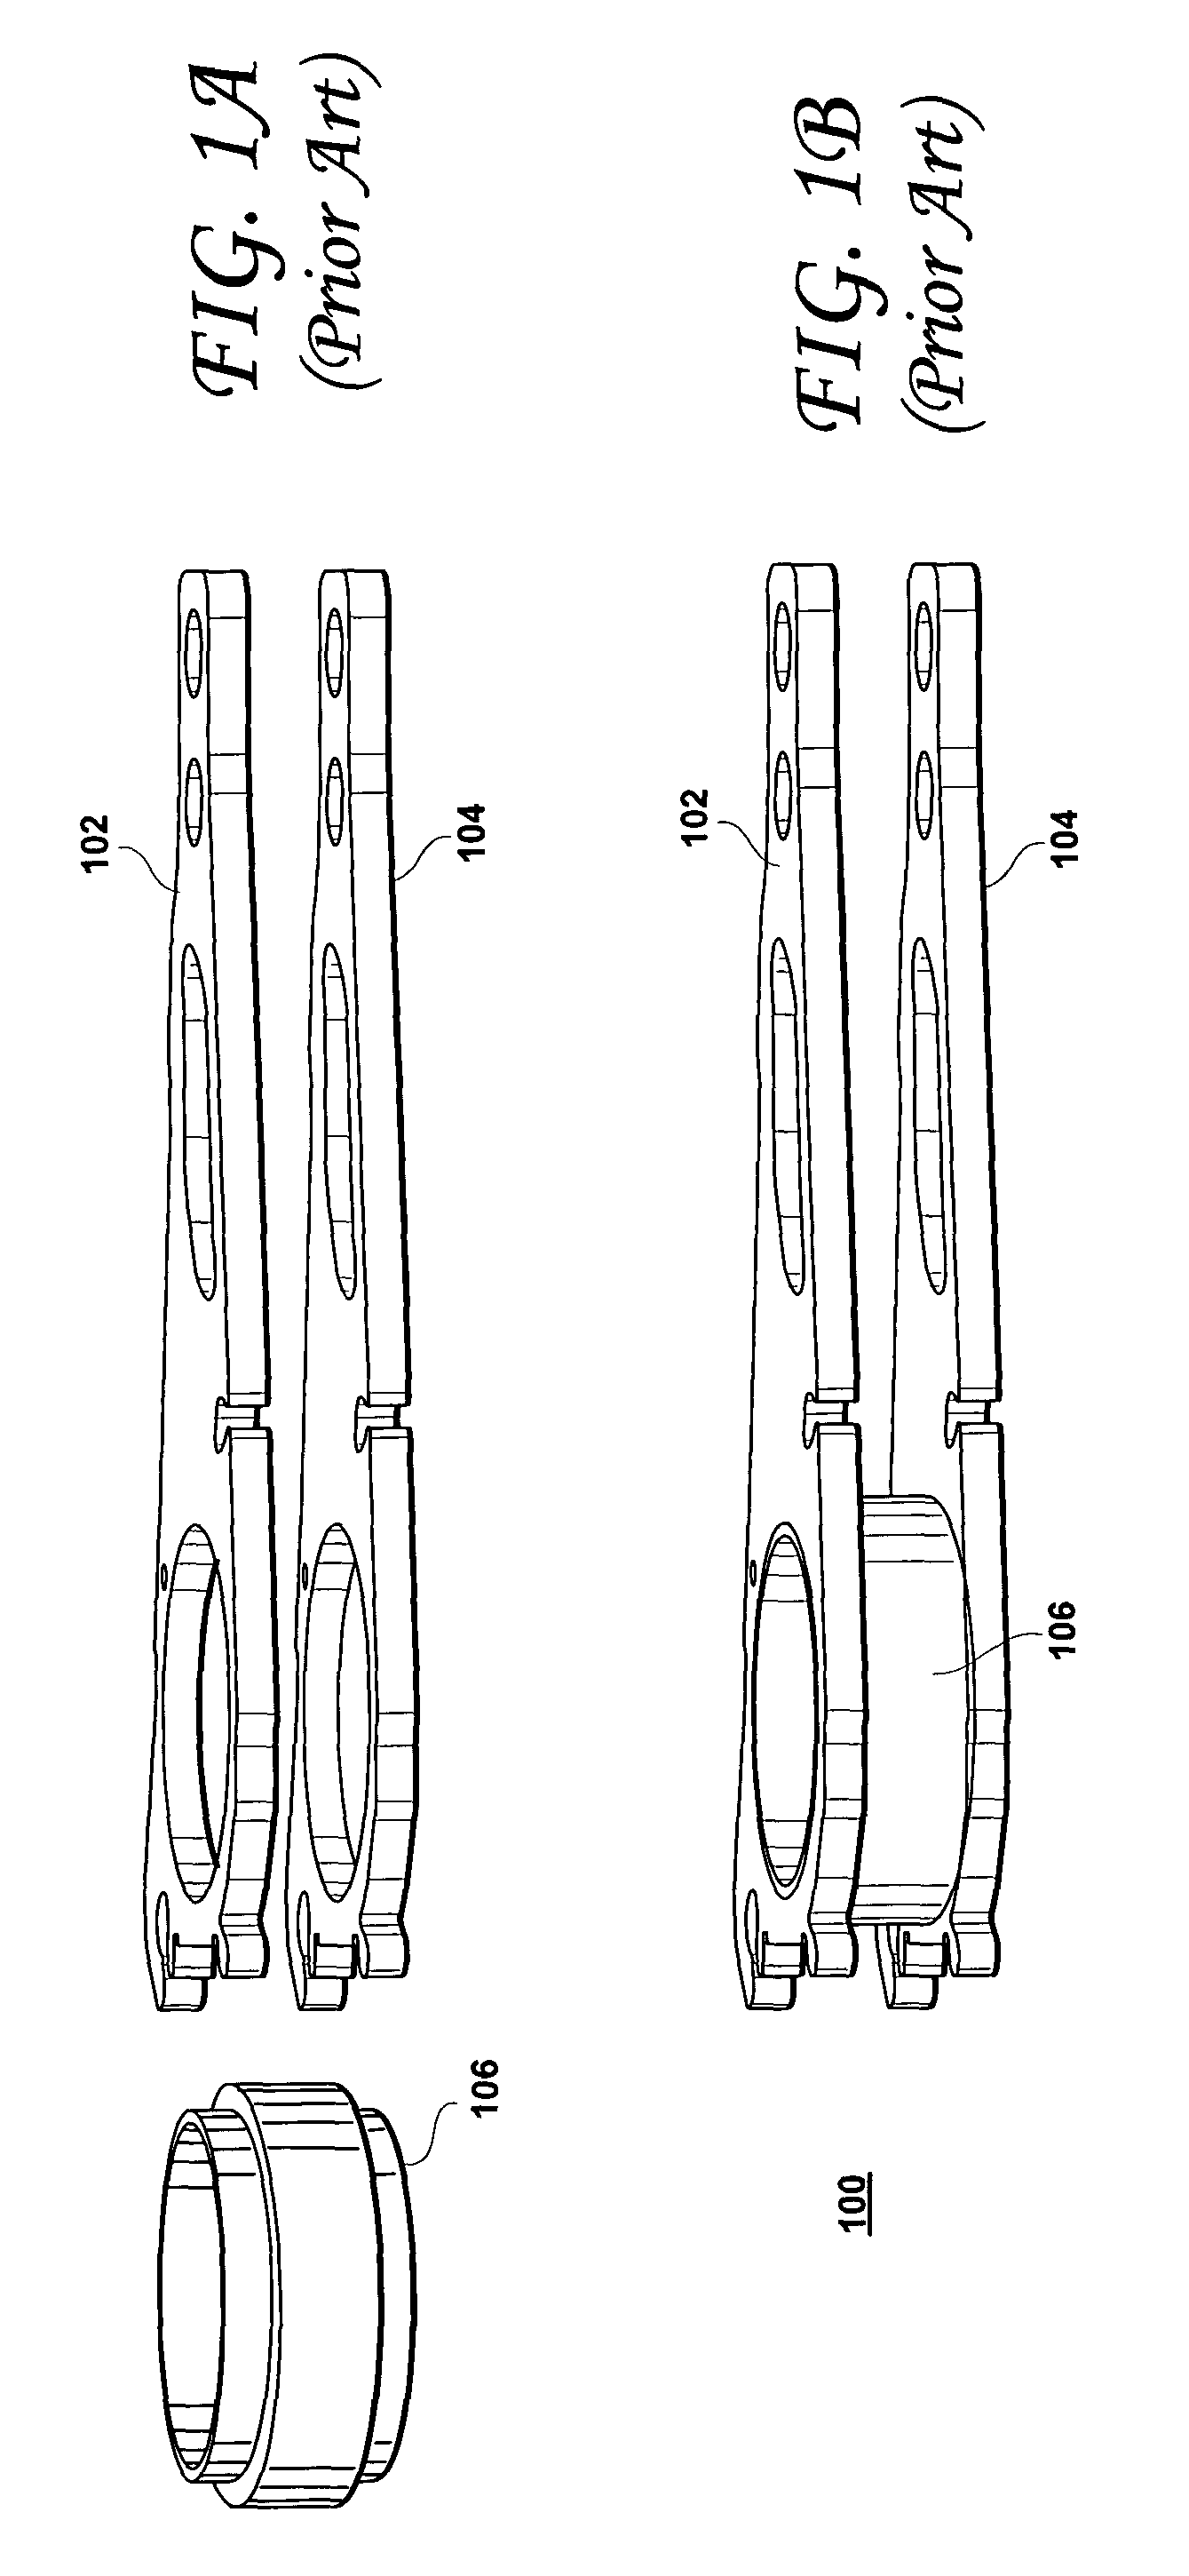 Disk drive having an actuator arm assembly that includes stamped actuator arms